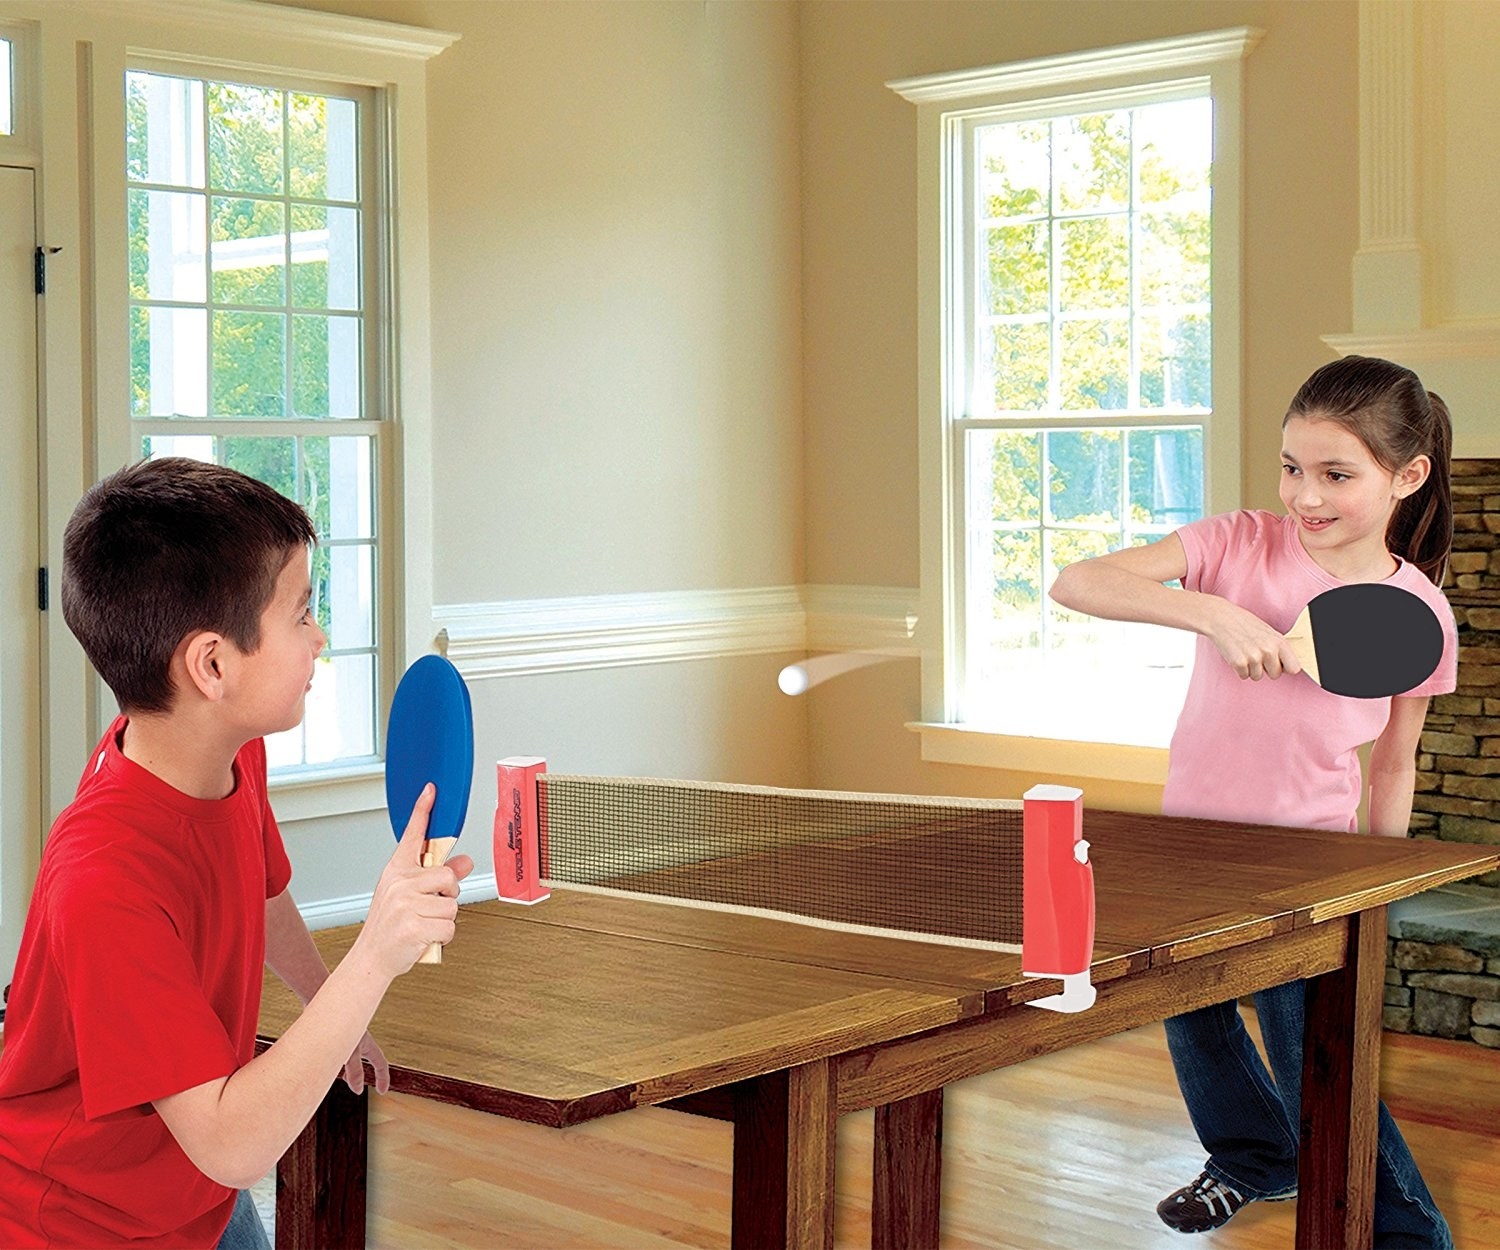 Two kids playing ping pong with a net over a wooden table